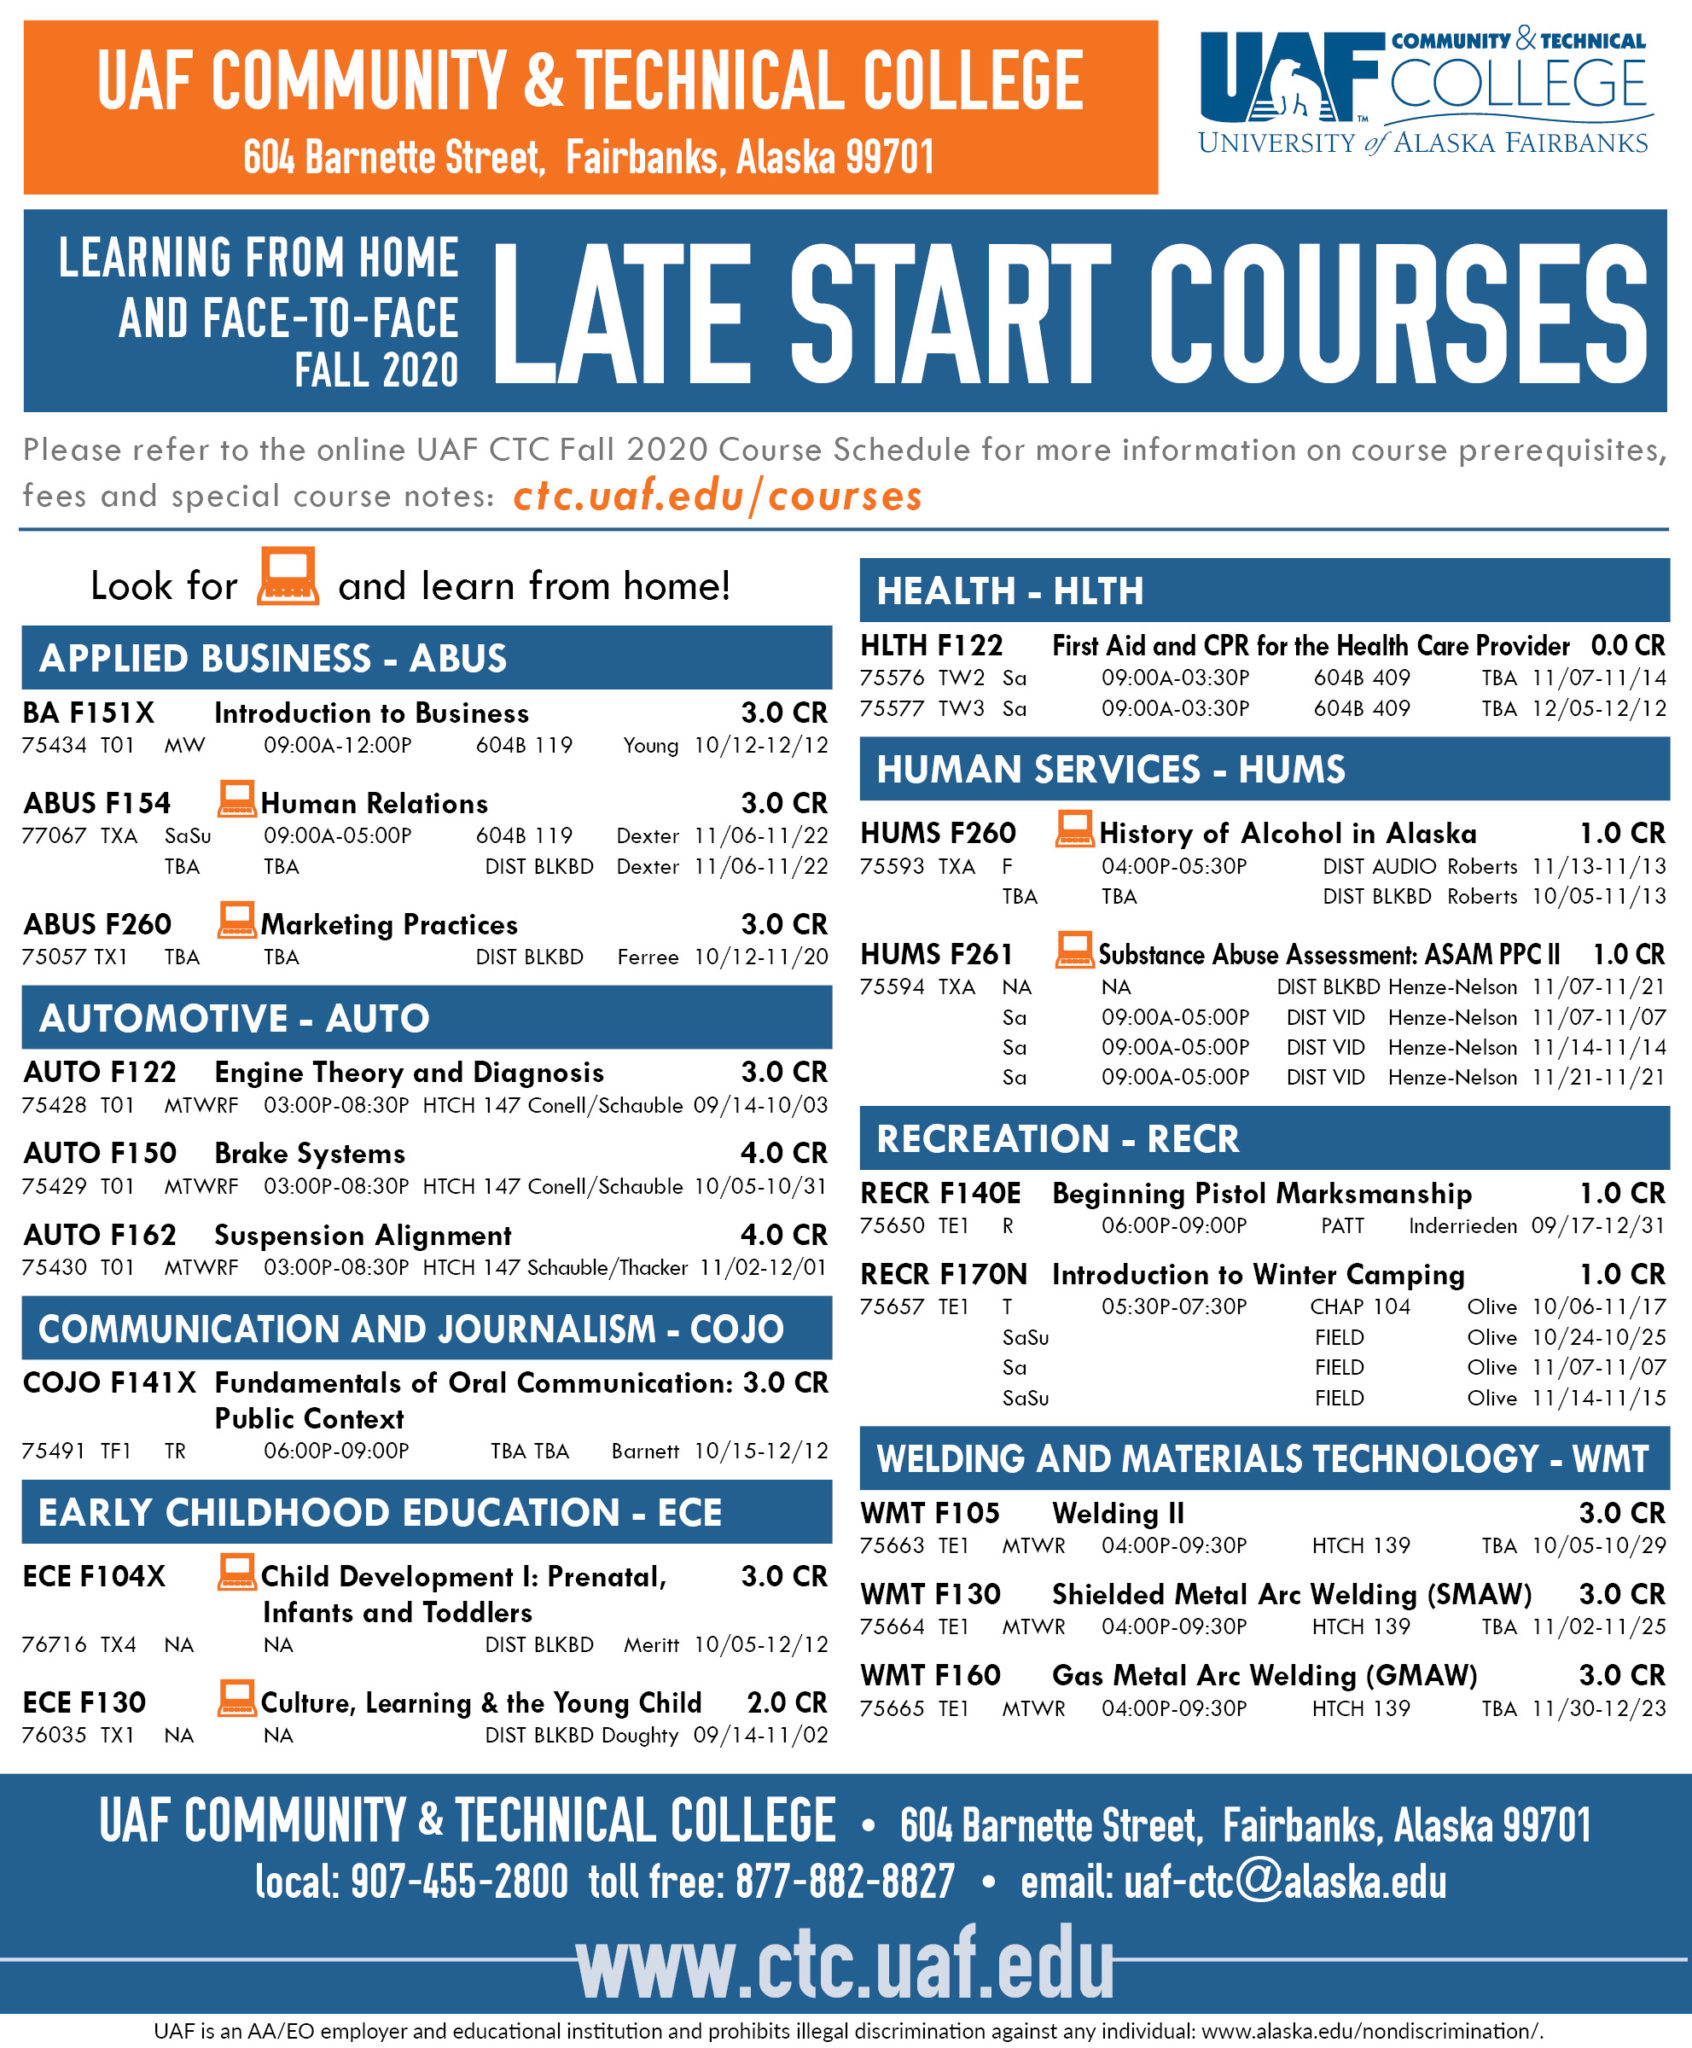 Fall 2020 late start courses open for registration UAF Community